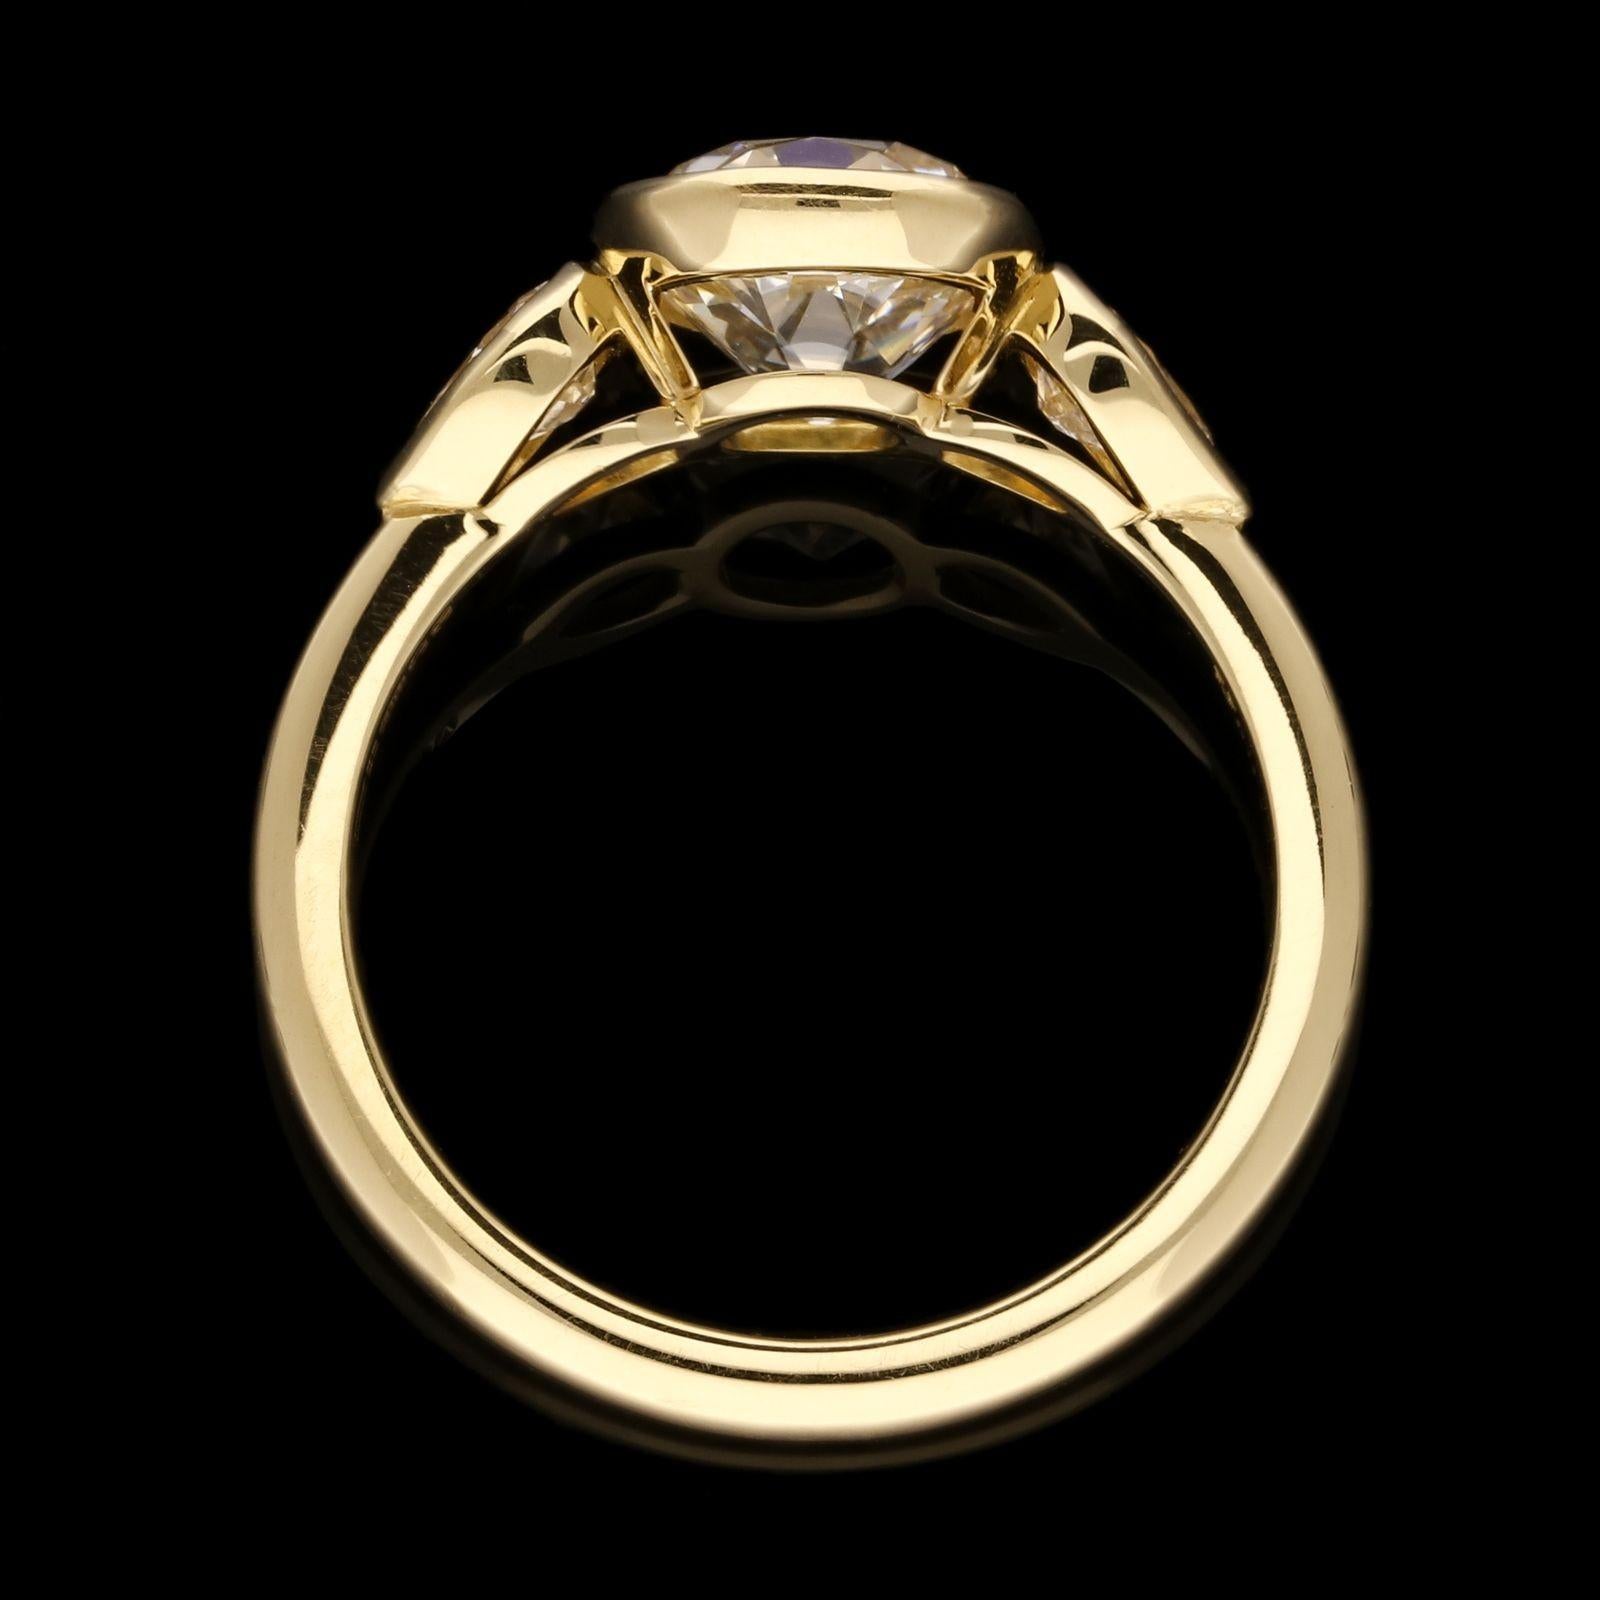 Women's or Men's Hancocks 1.77ct Old Cut Diamond Ring Pear Shaped Shoulders Rub Over Gold Setting For Sale